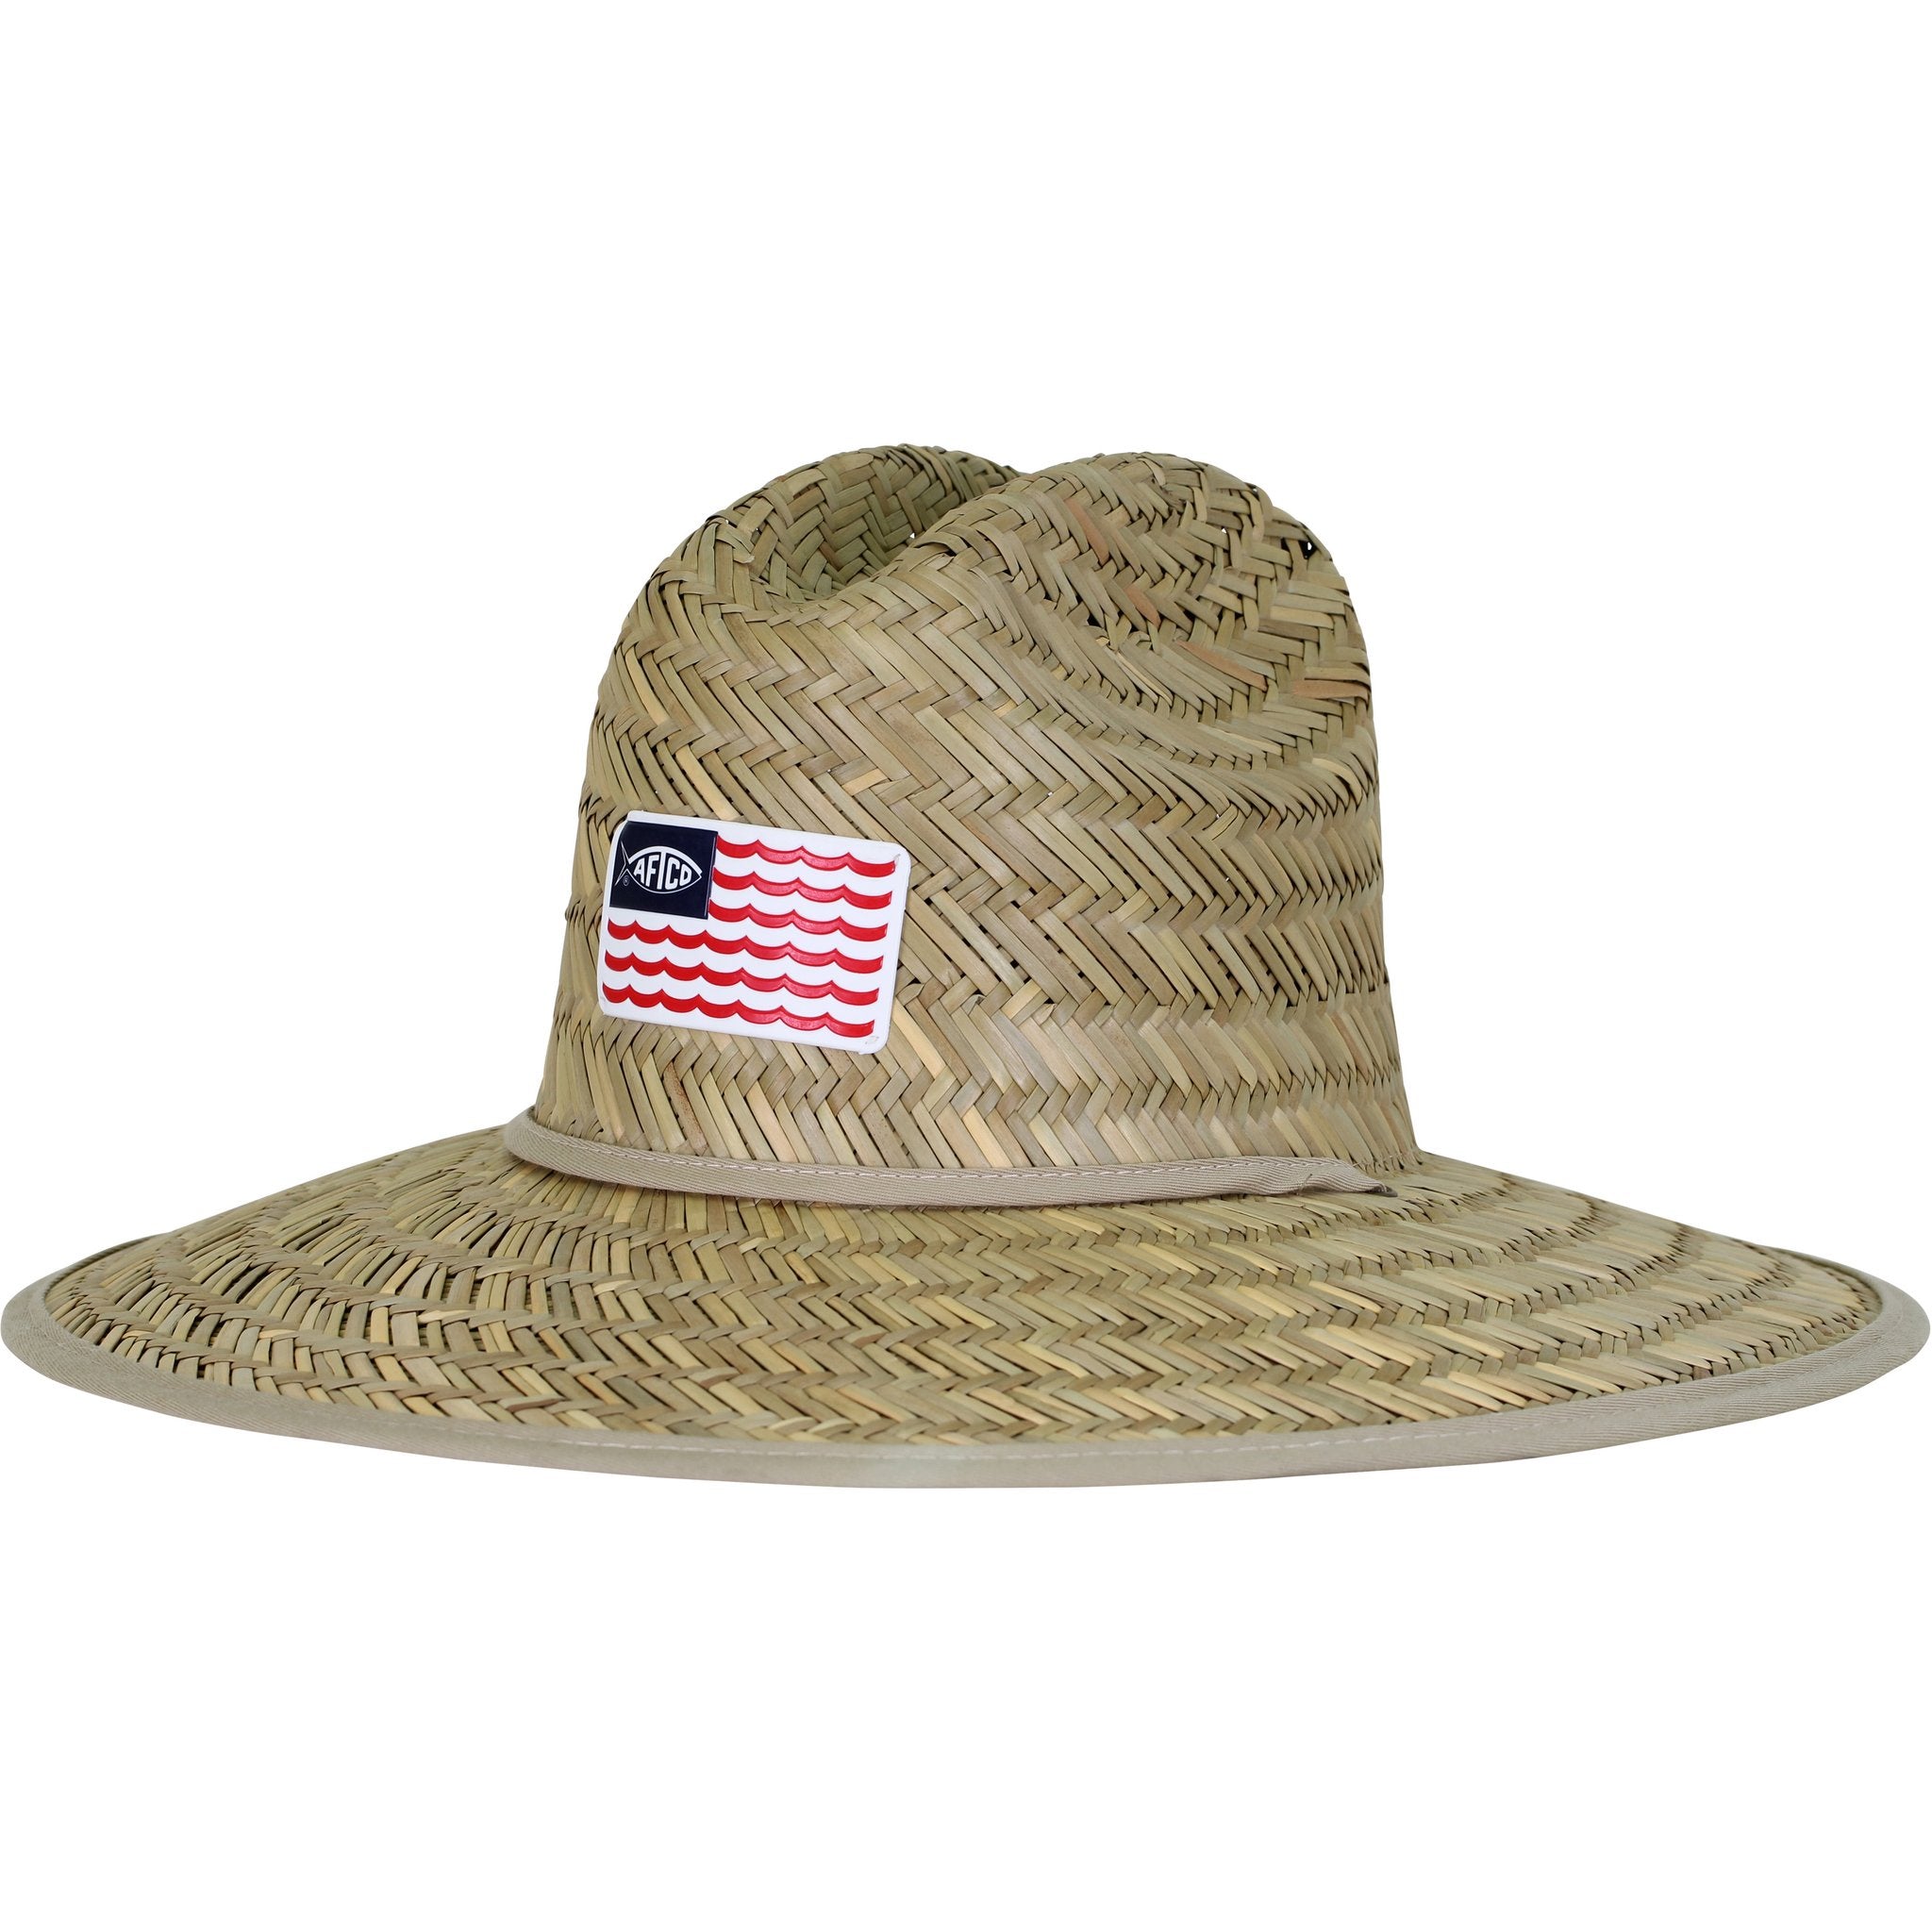 AFTCO Palapa III Straw Hat - Andy Thornal Company